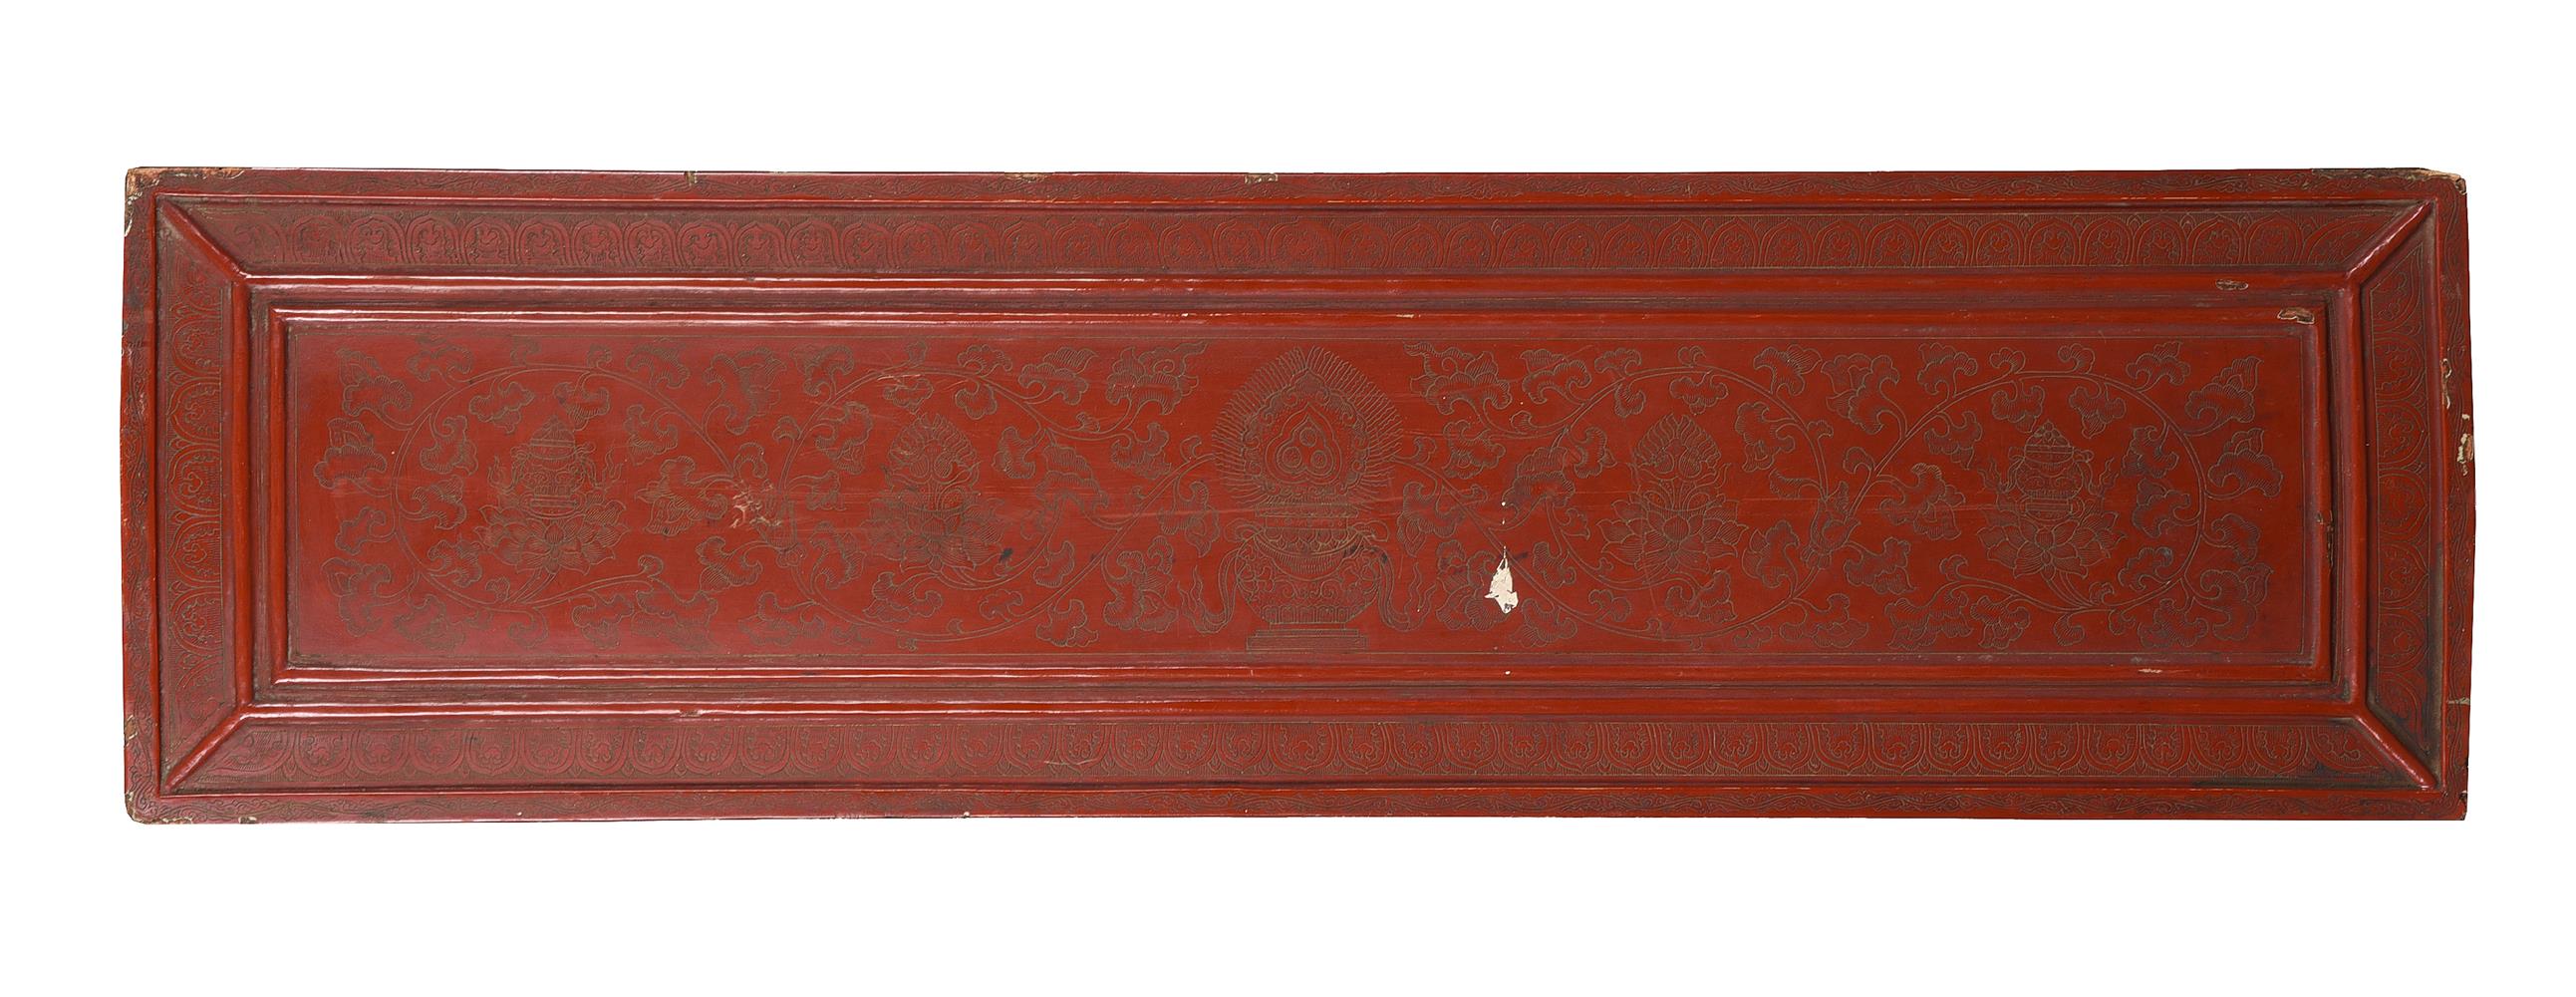 A Tibetan incised red lacquer wood book cover